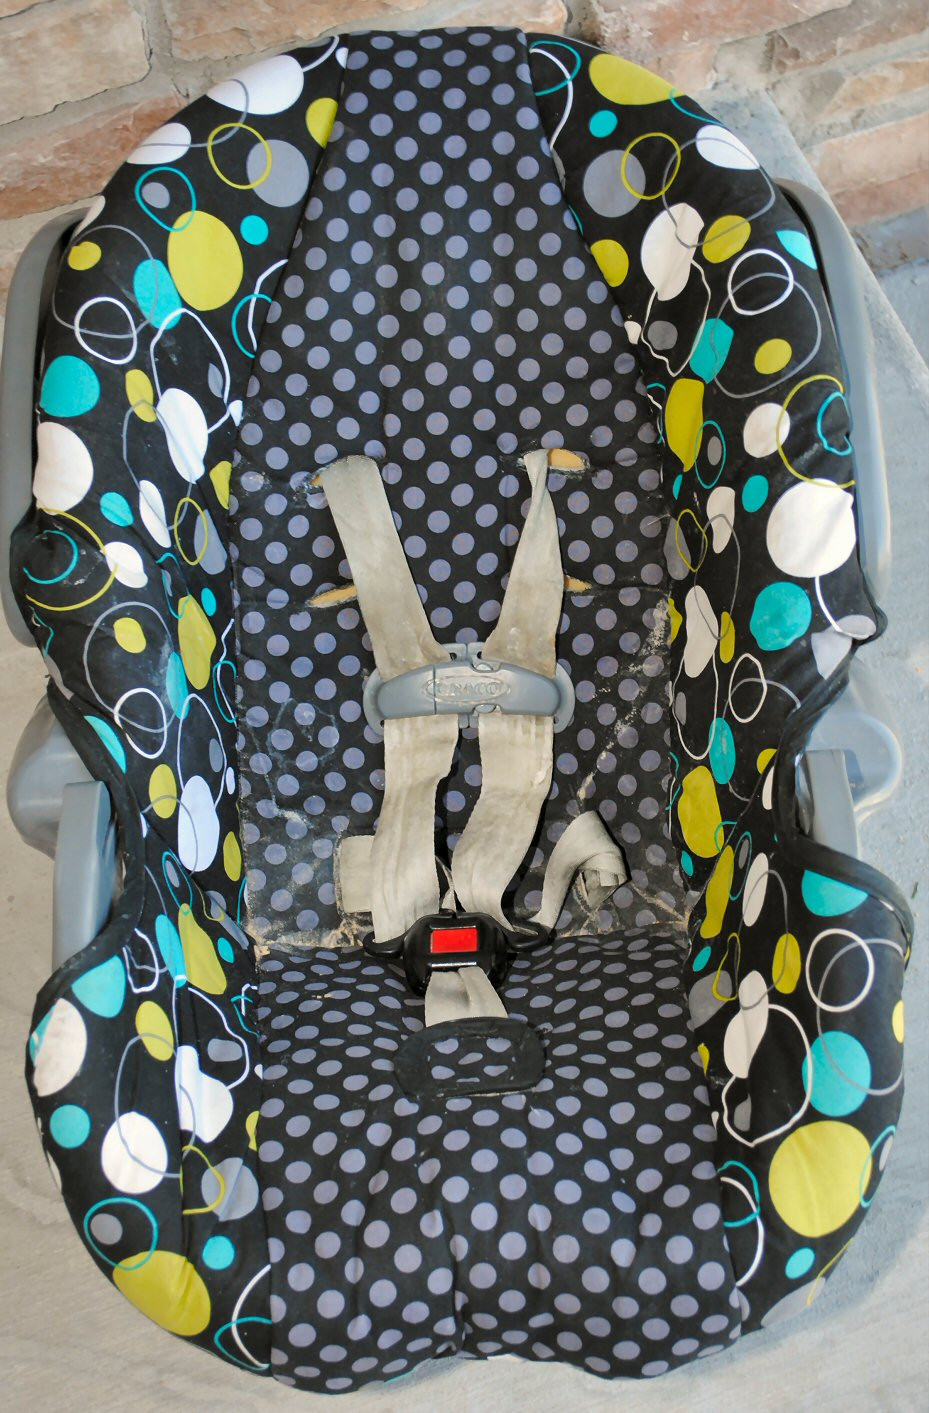 DIY Baby Car Seat Covers
 Infant Toddler Car Seat Cover Tutorial How to Cover a